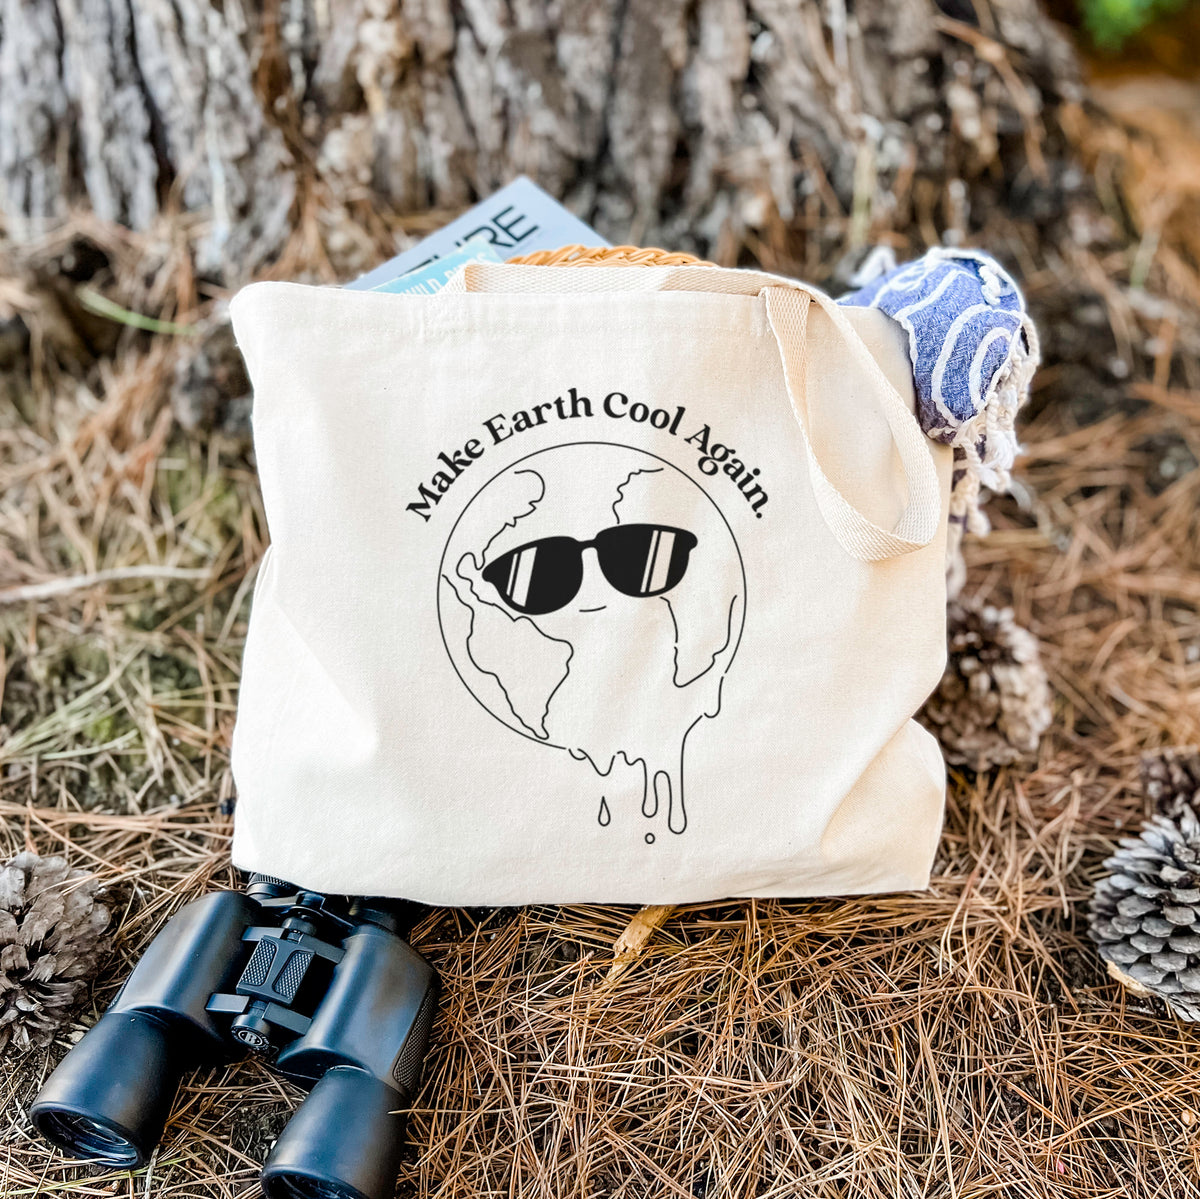 Make Earth Cool Again - Melted Planet - Tote Bag